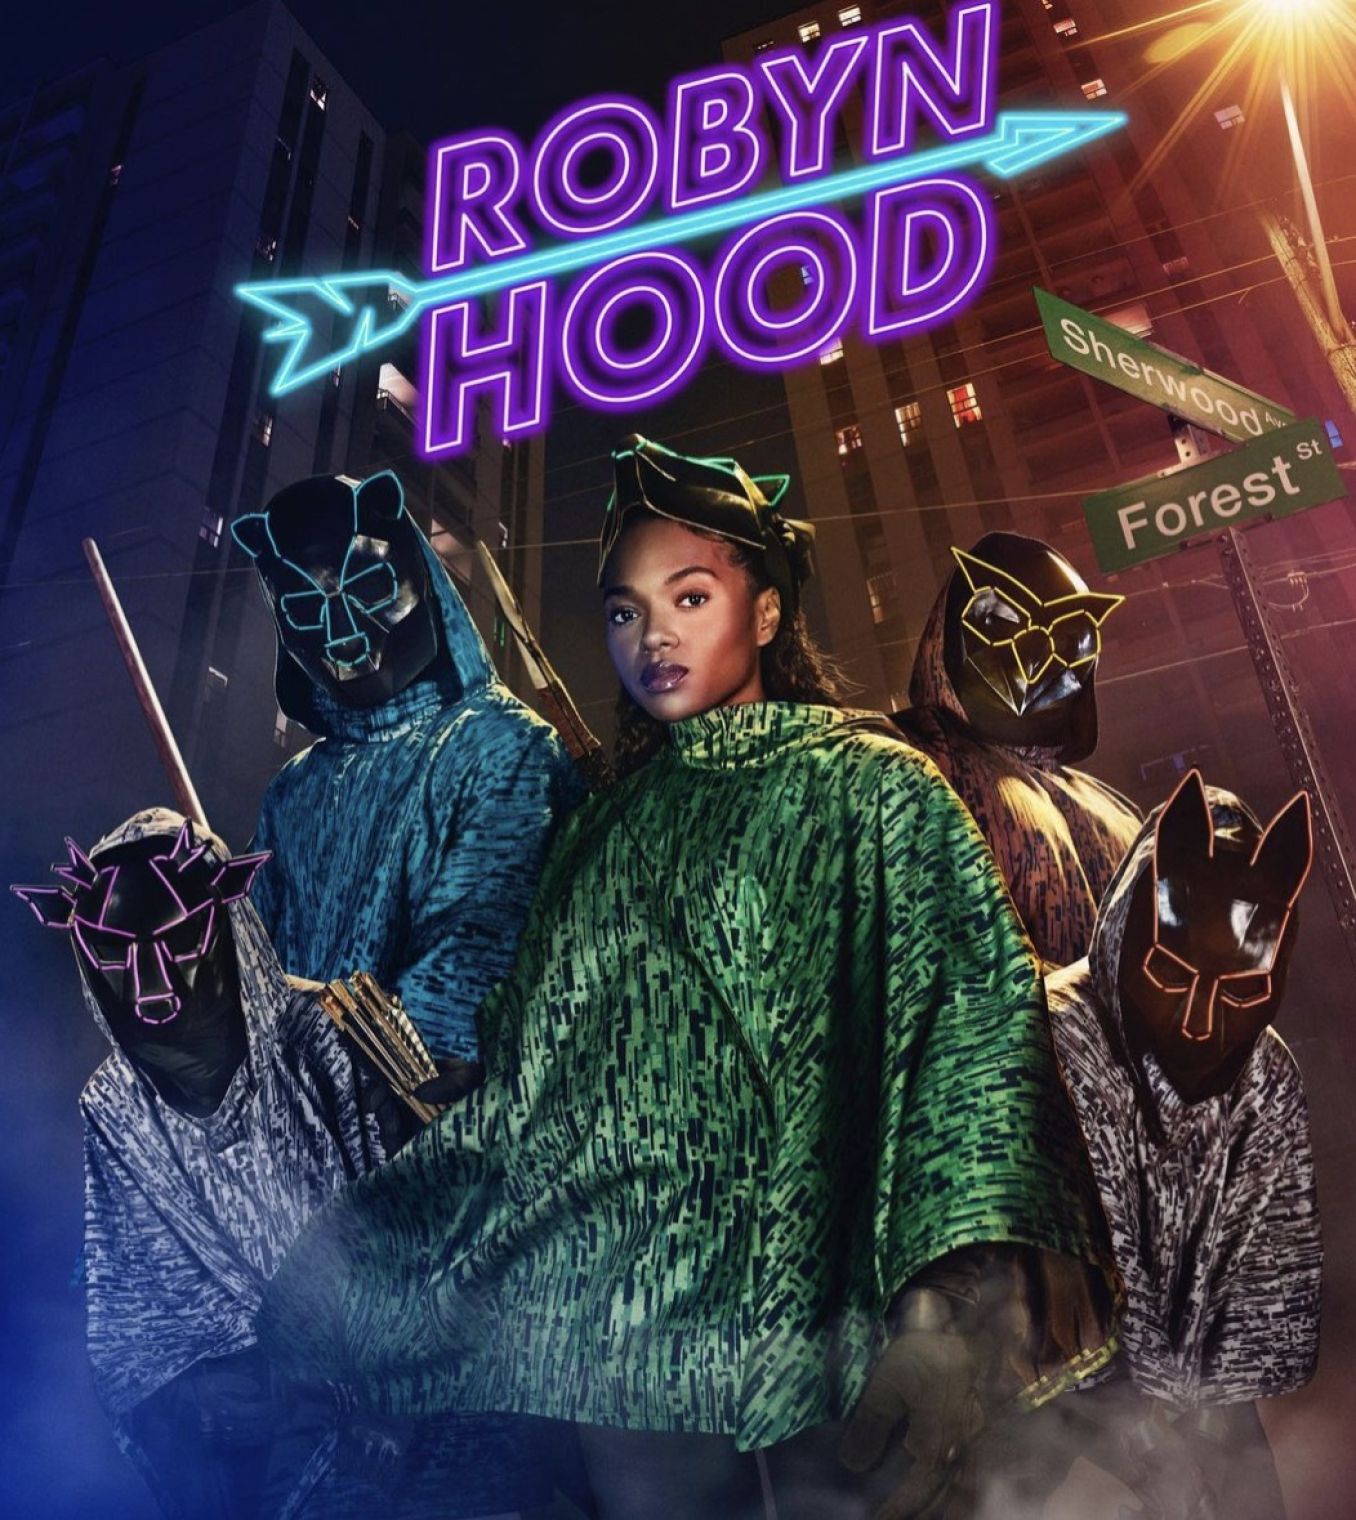 Jessye Romeo stars in the title role in ‘Robyn Hood’ which premieres on Canadian channels Global TV & Stack TV at the end of this month